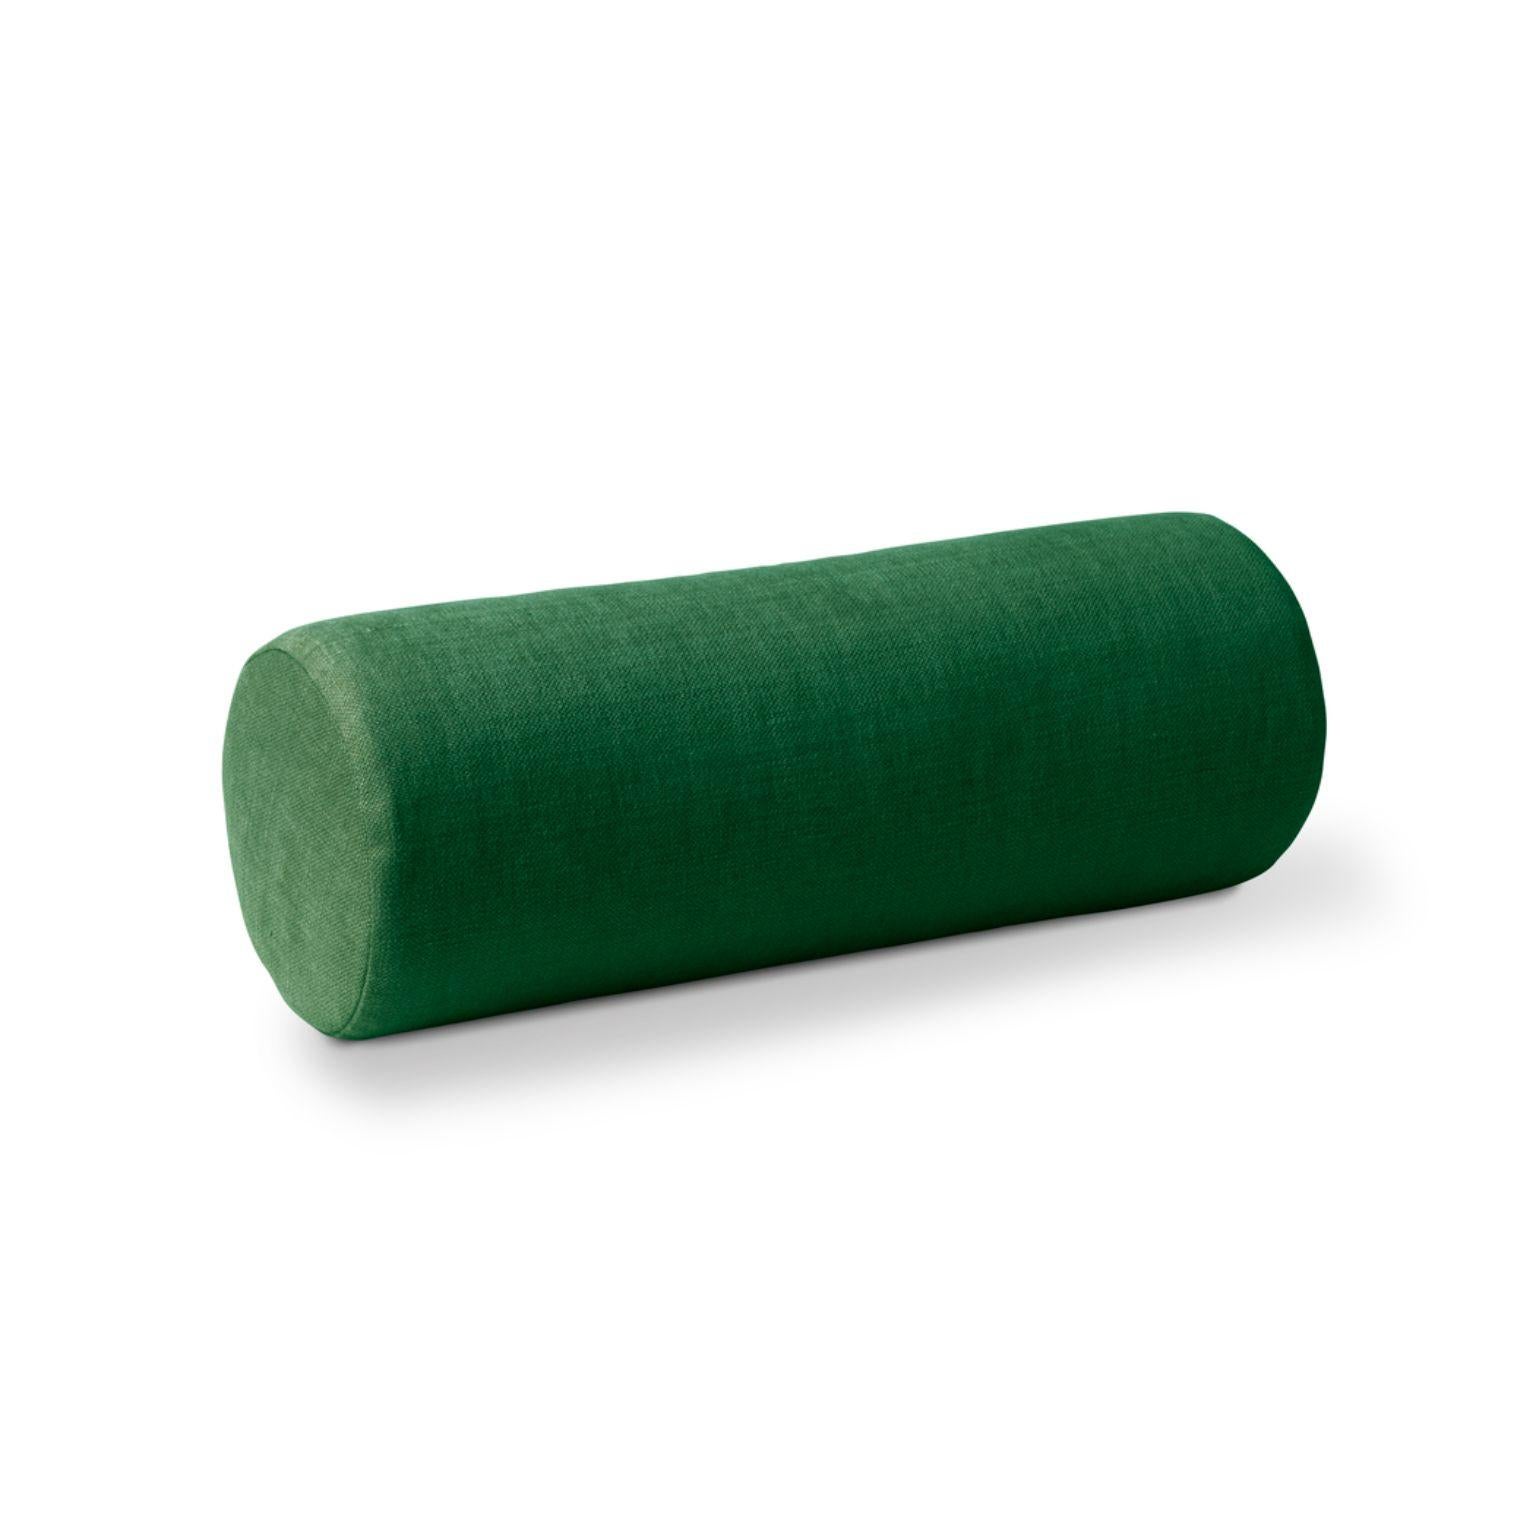 Galore cushion emerald by Warm Nordic
Dimensions: D 16 x H 46 cm
Material: textile upholstery, granulate and feathers filling.
Weight: 0.9 kg
Also available in different colours and finishes. 

An elegant bolster cushion, which matches the